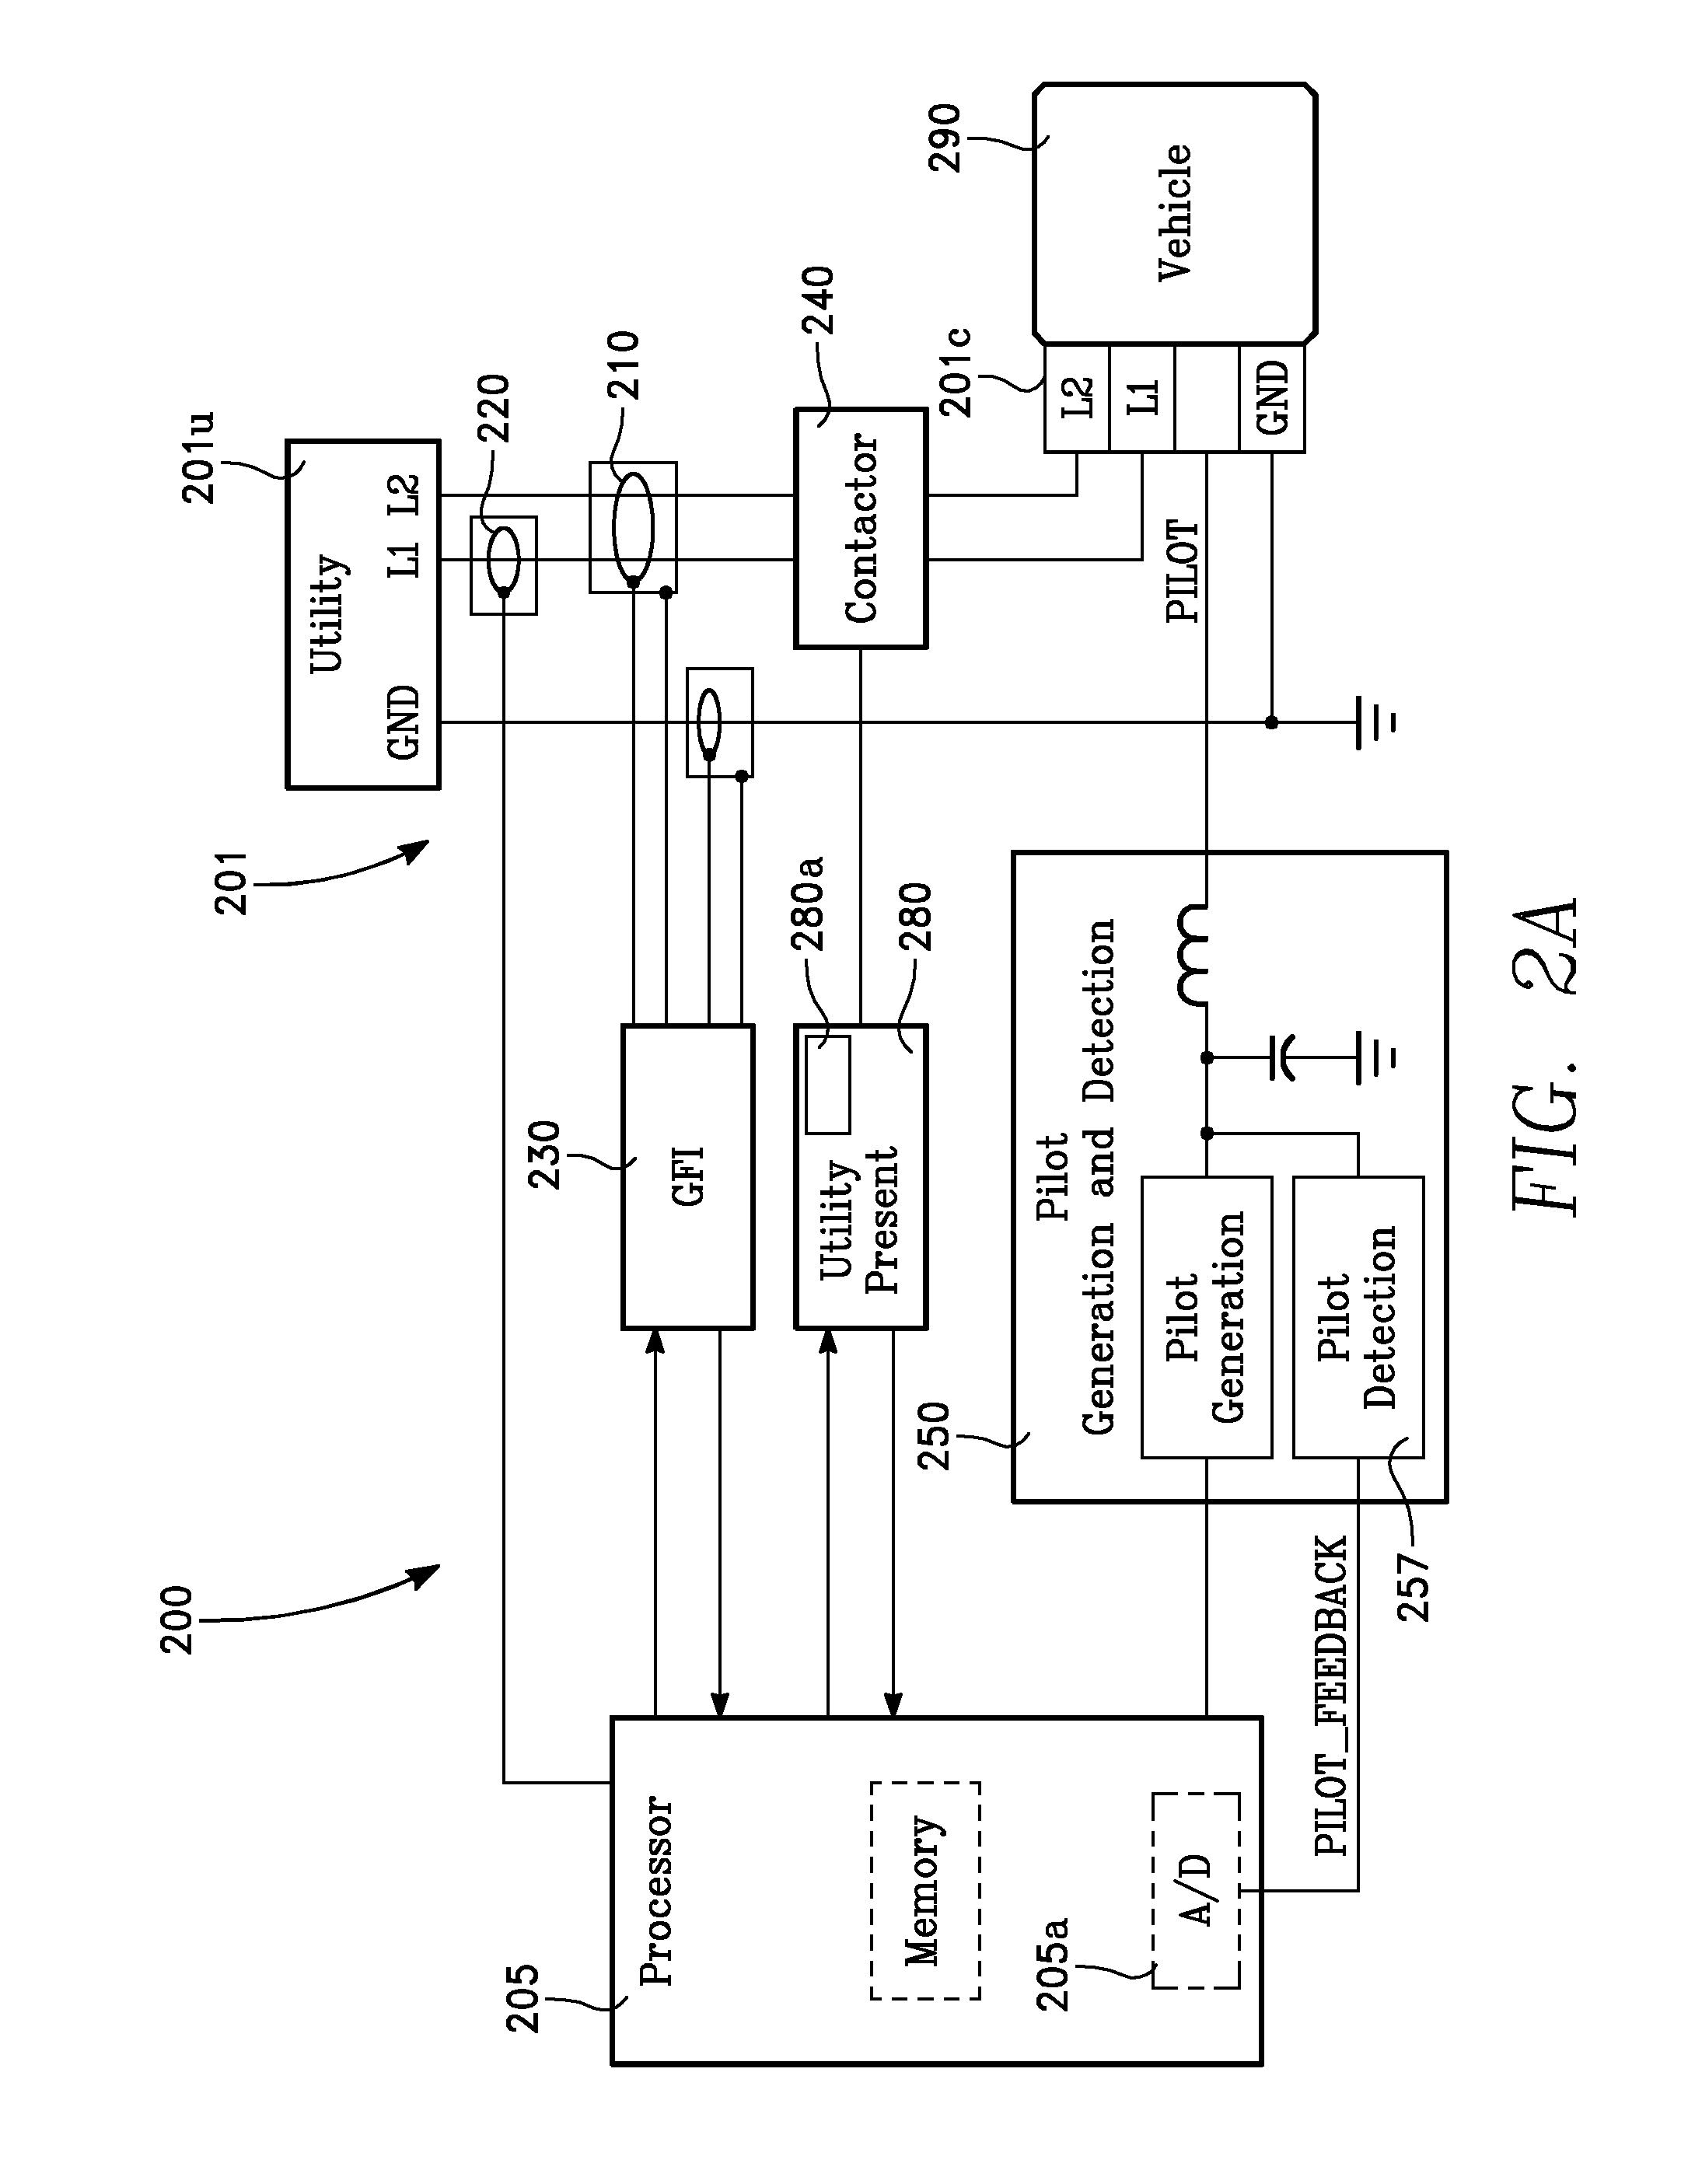 Frequency responsive charging system and method